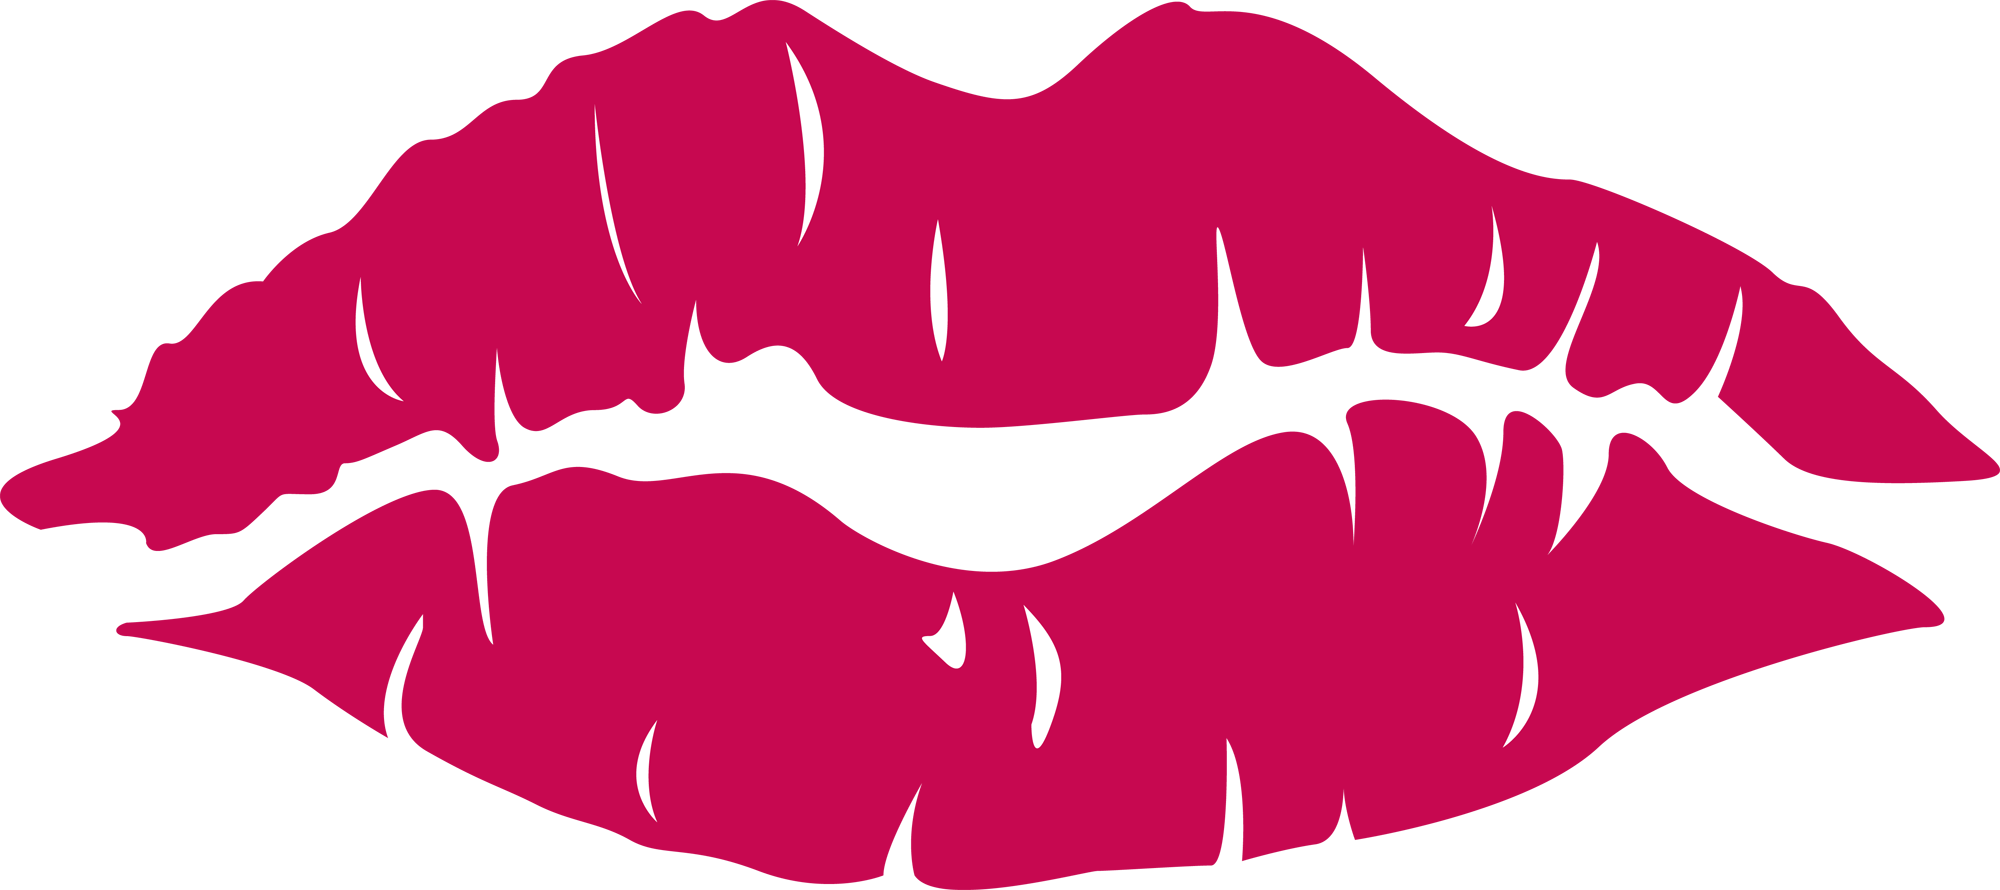 Red cartoon lips clip art - Clipart library - Clipart library